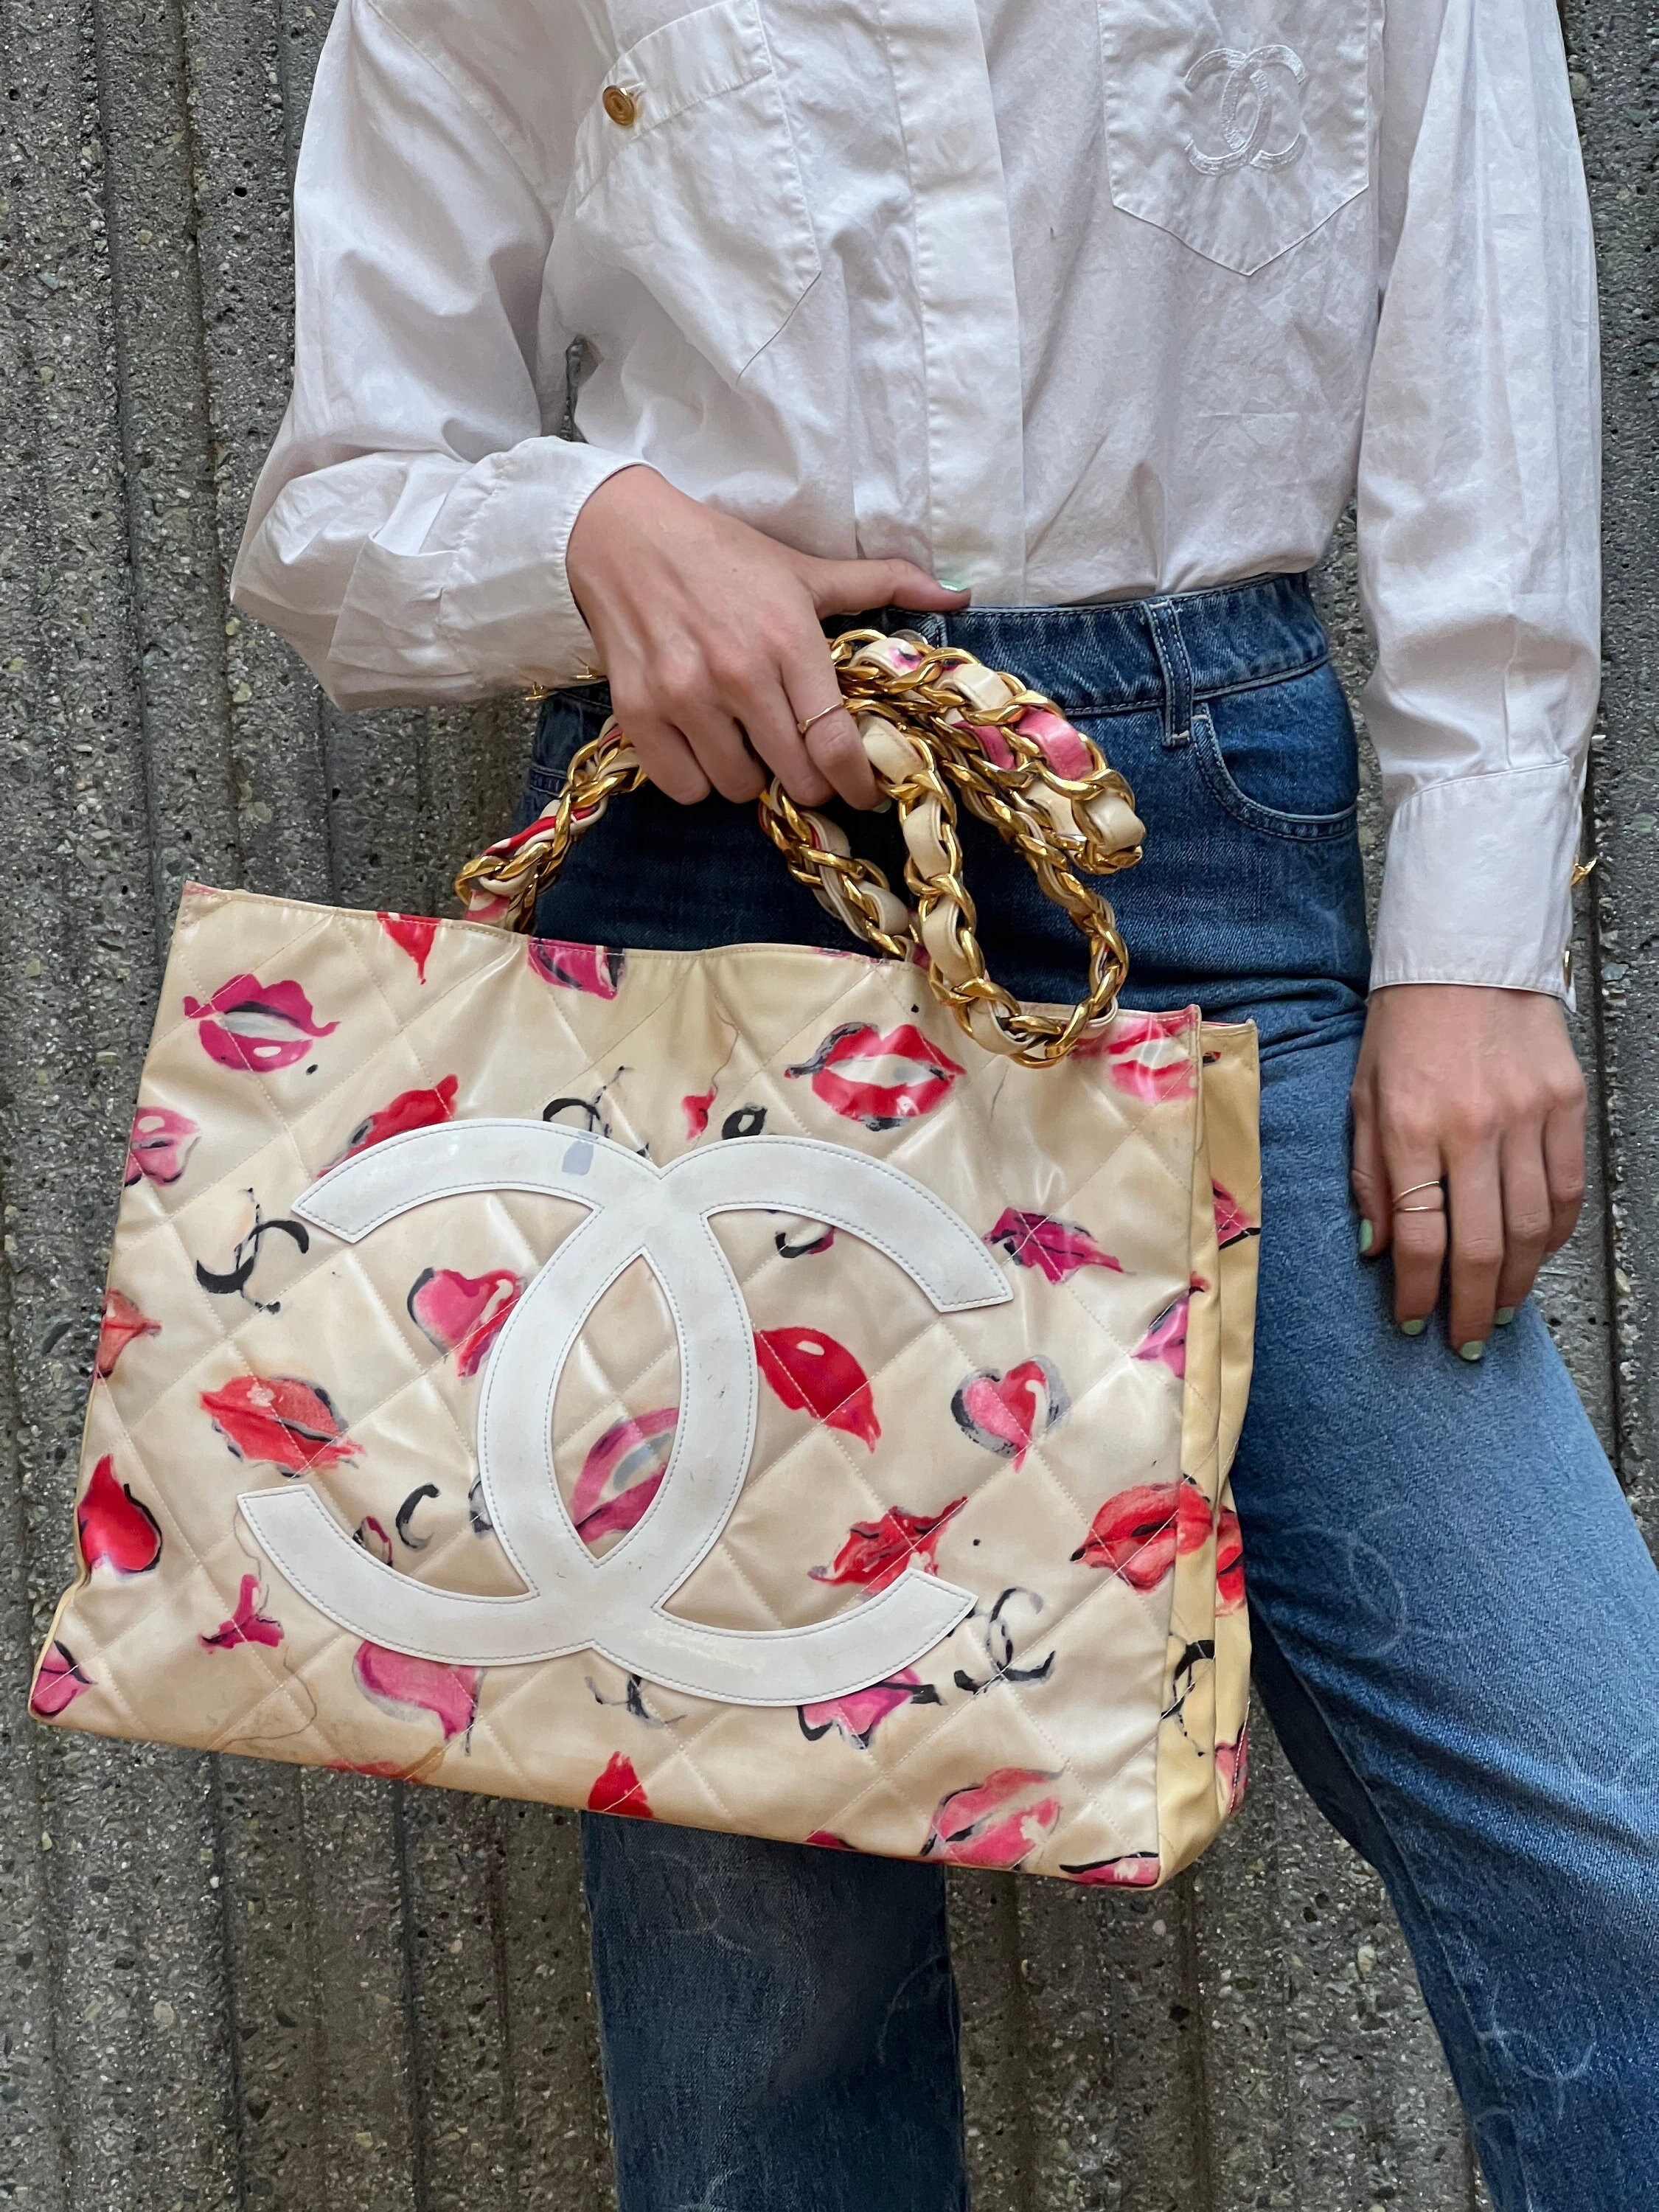 Chanel Coco Lips and Heart Vinyl Tote